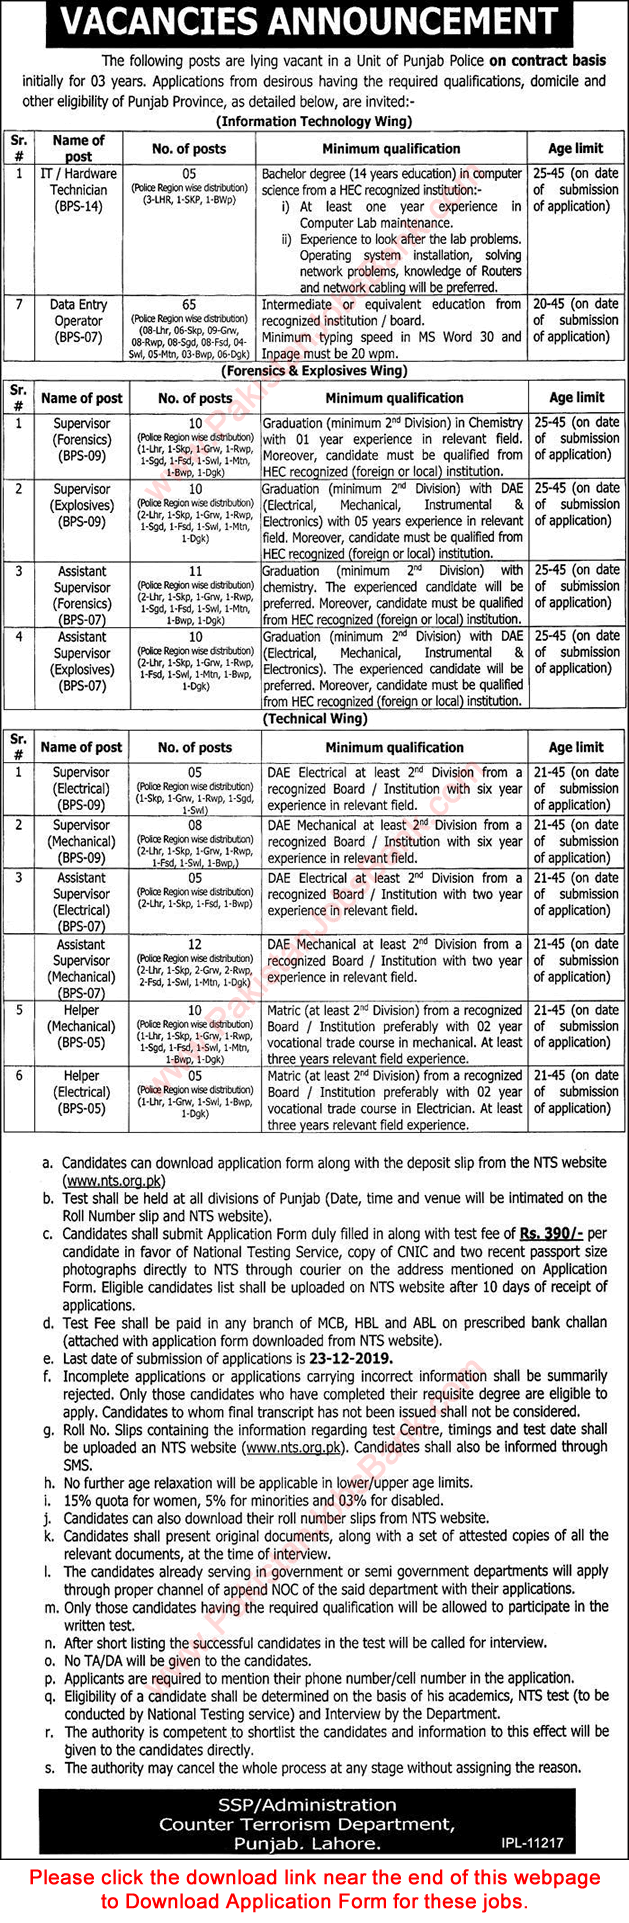 CTD Punjab Police Jobs 2019 December NTS Application Form Data Entry Operators, Supervisors & Others Counter Terrorism Department Latest